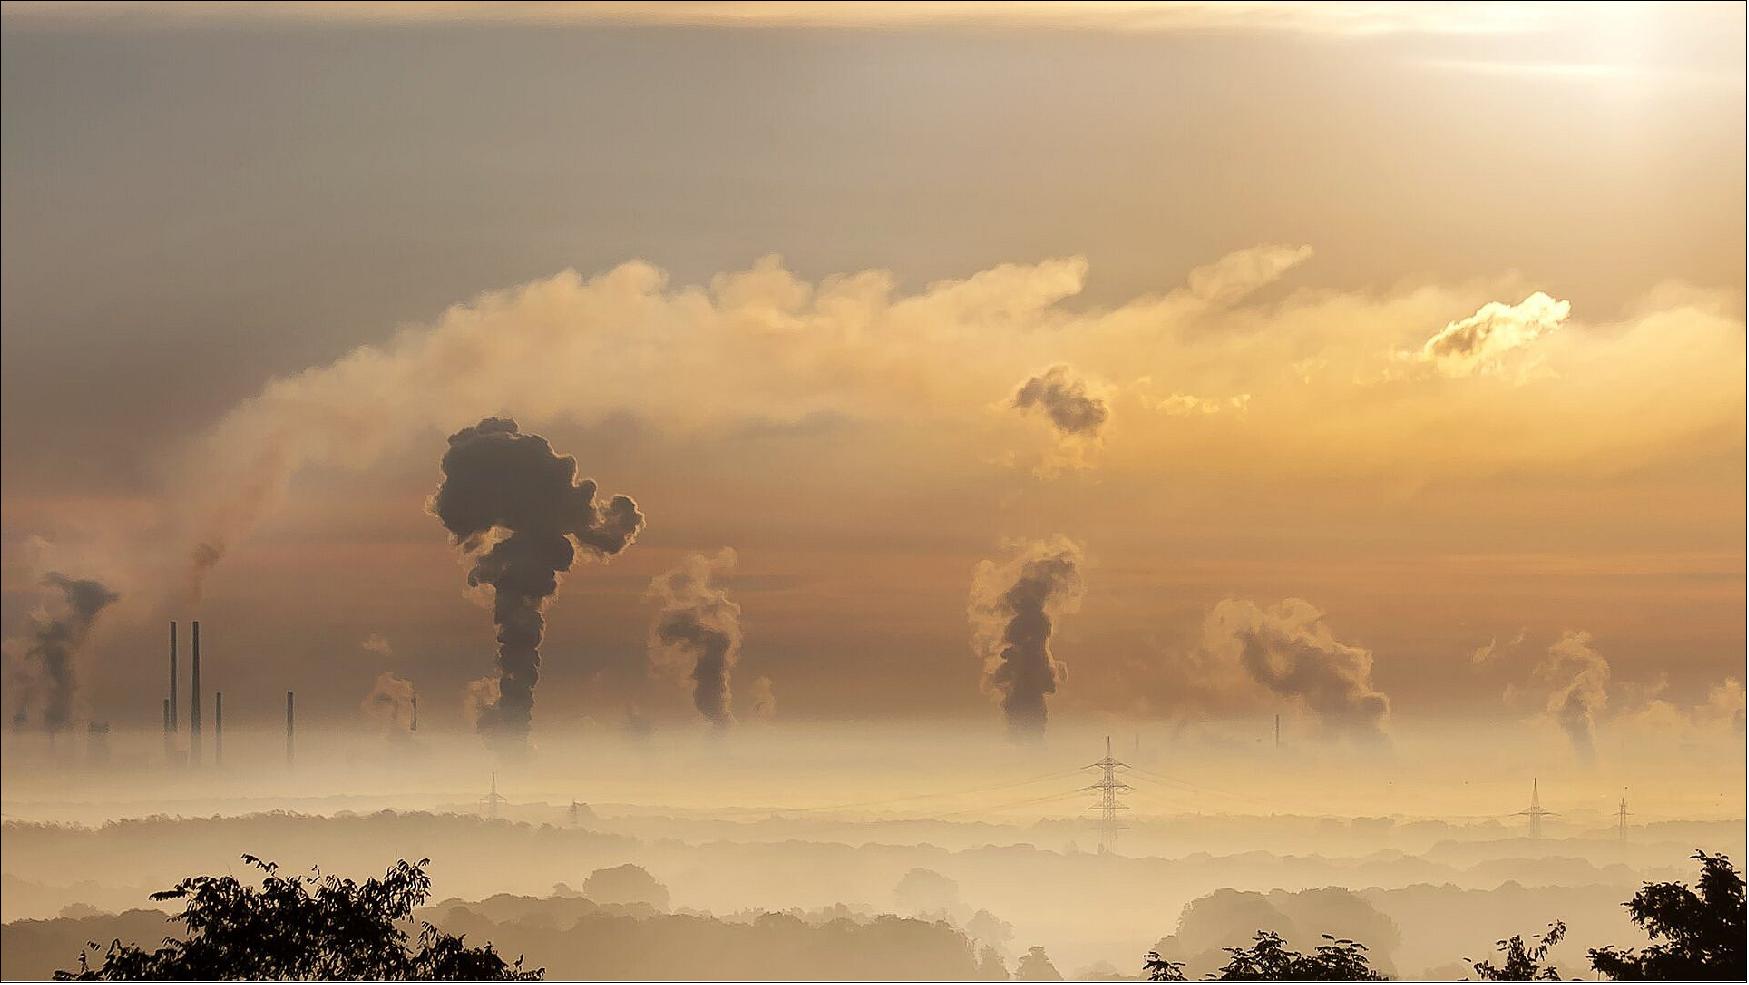 Figure 3: Industrial emissions of carbon dioxide fuel our warming climate (image credit: Pixabay/Foto-RaBe) 3)